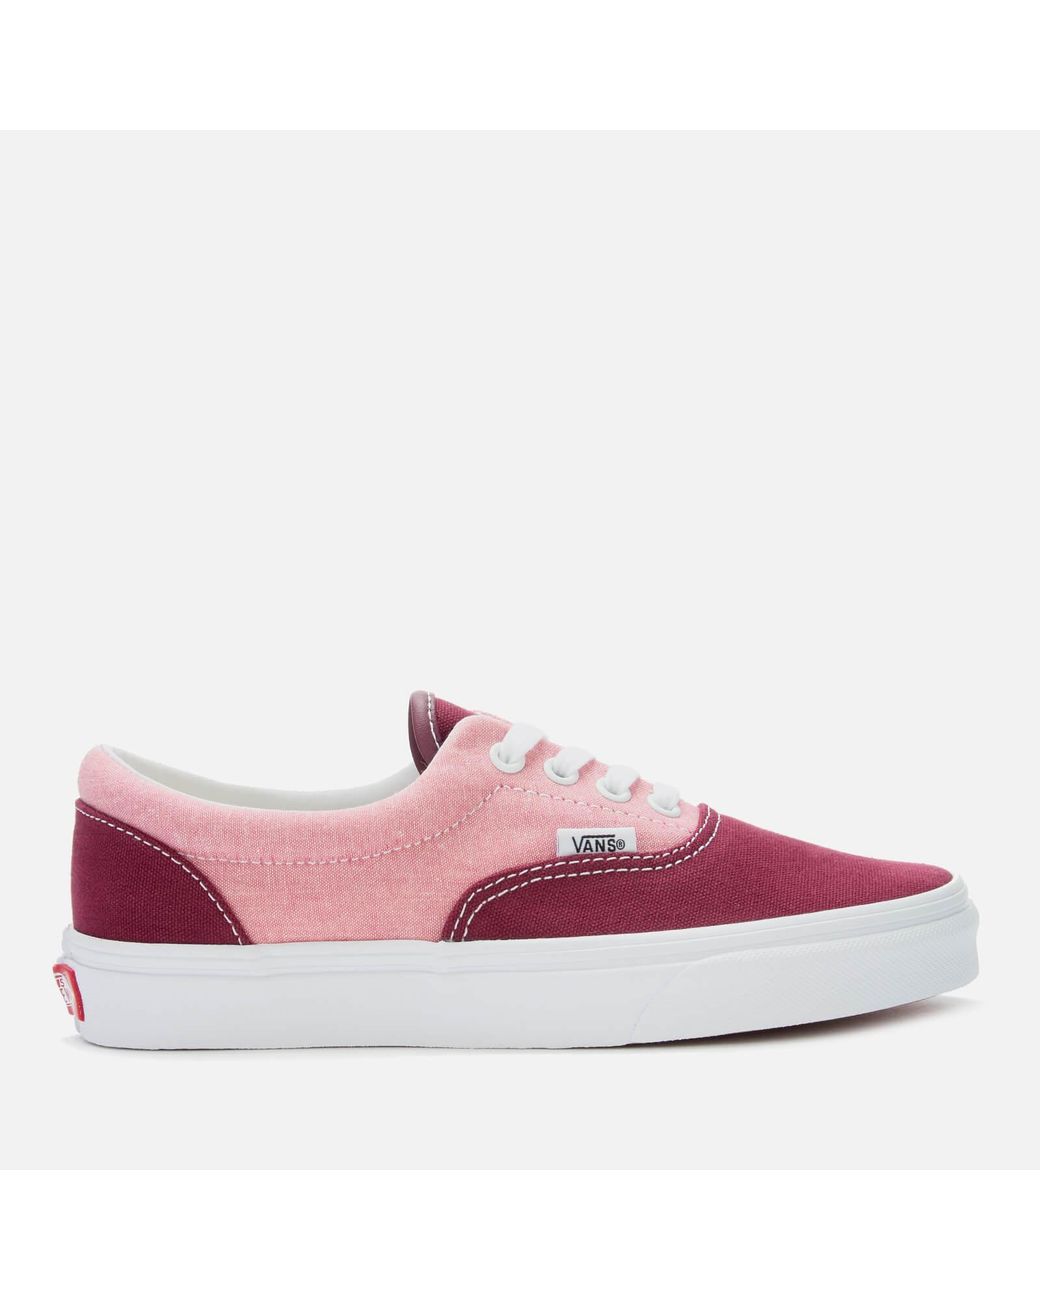 Vans Canvas Chambray Era Trainers in Burgundy/Pink (Pink) | Lyst